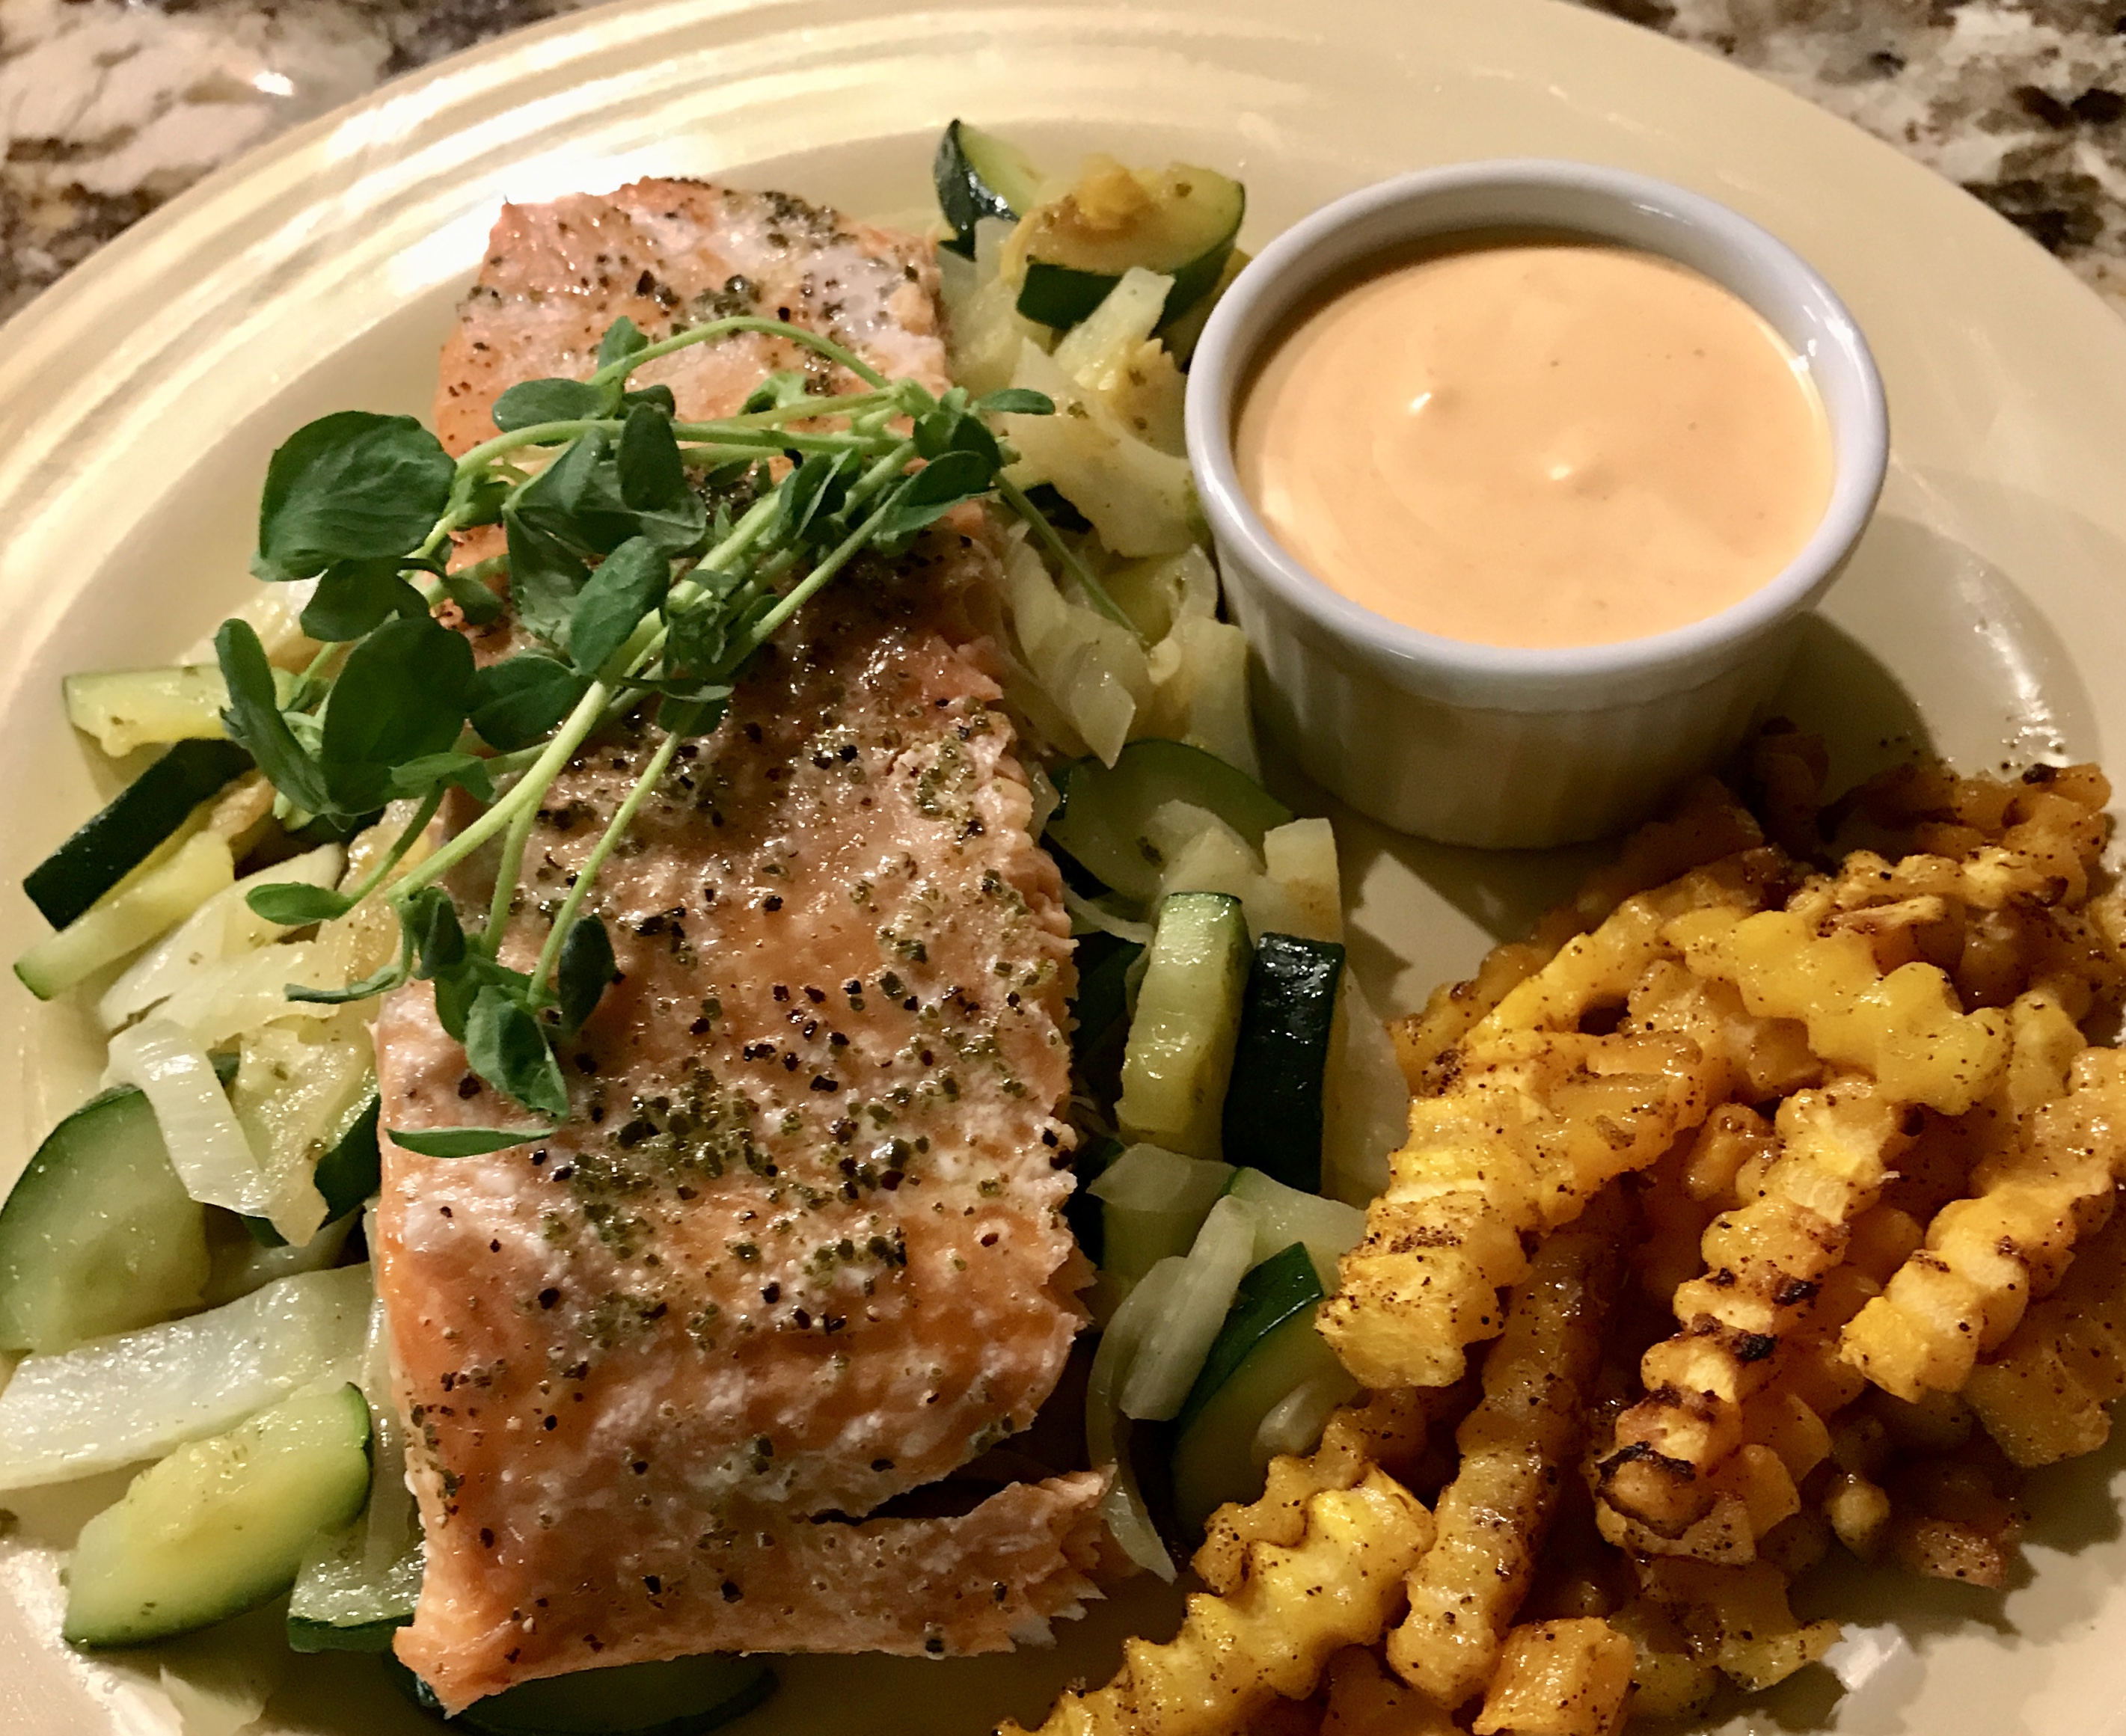 Grilled Salmon and Butternut Squash Crinkle “Fries”